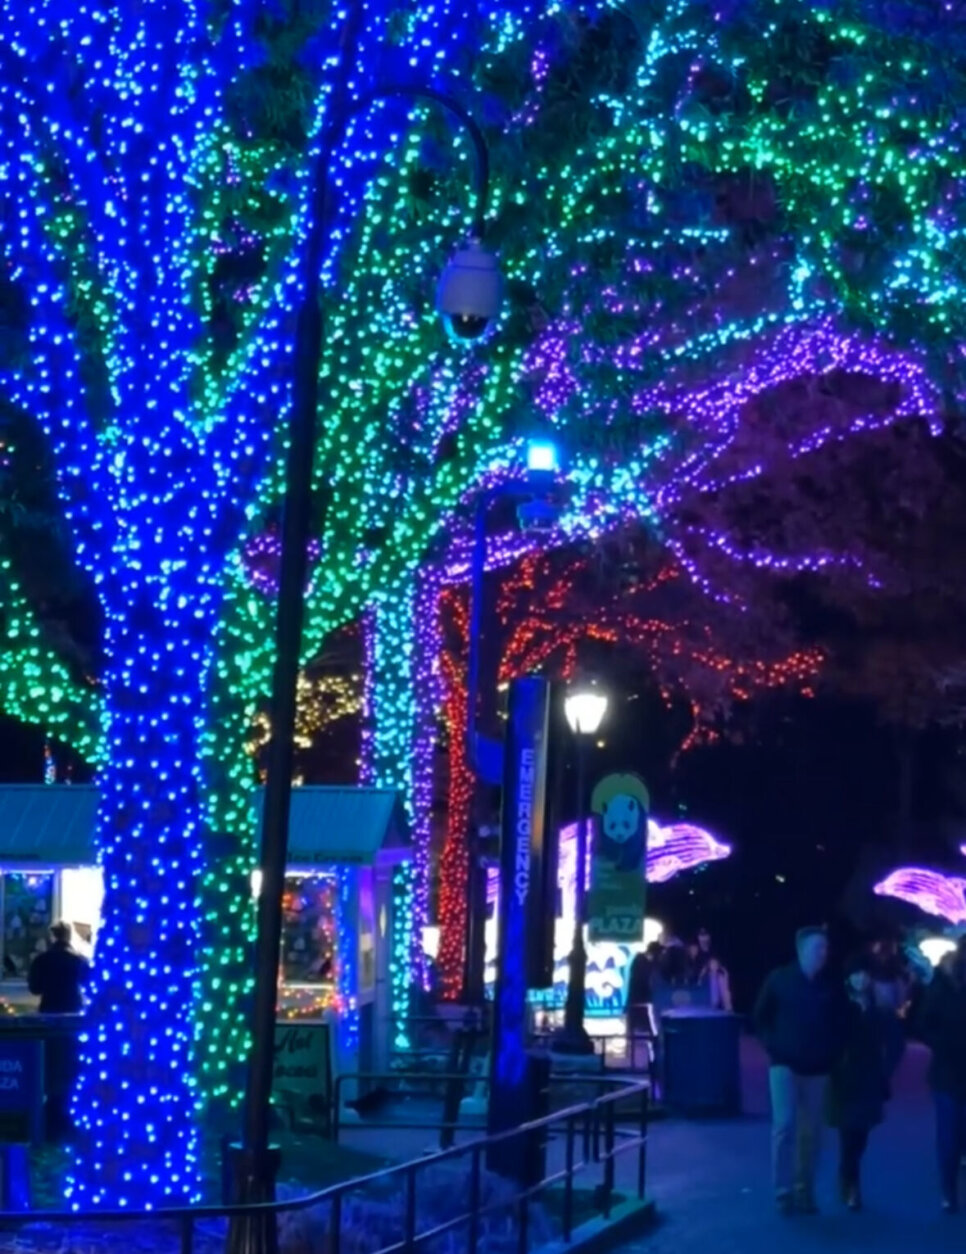 Trees lit up at Smithsonian National Zoo for "Zoo Lights"